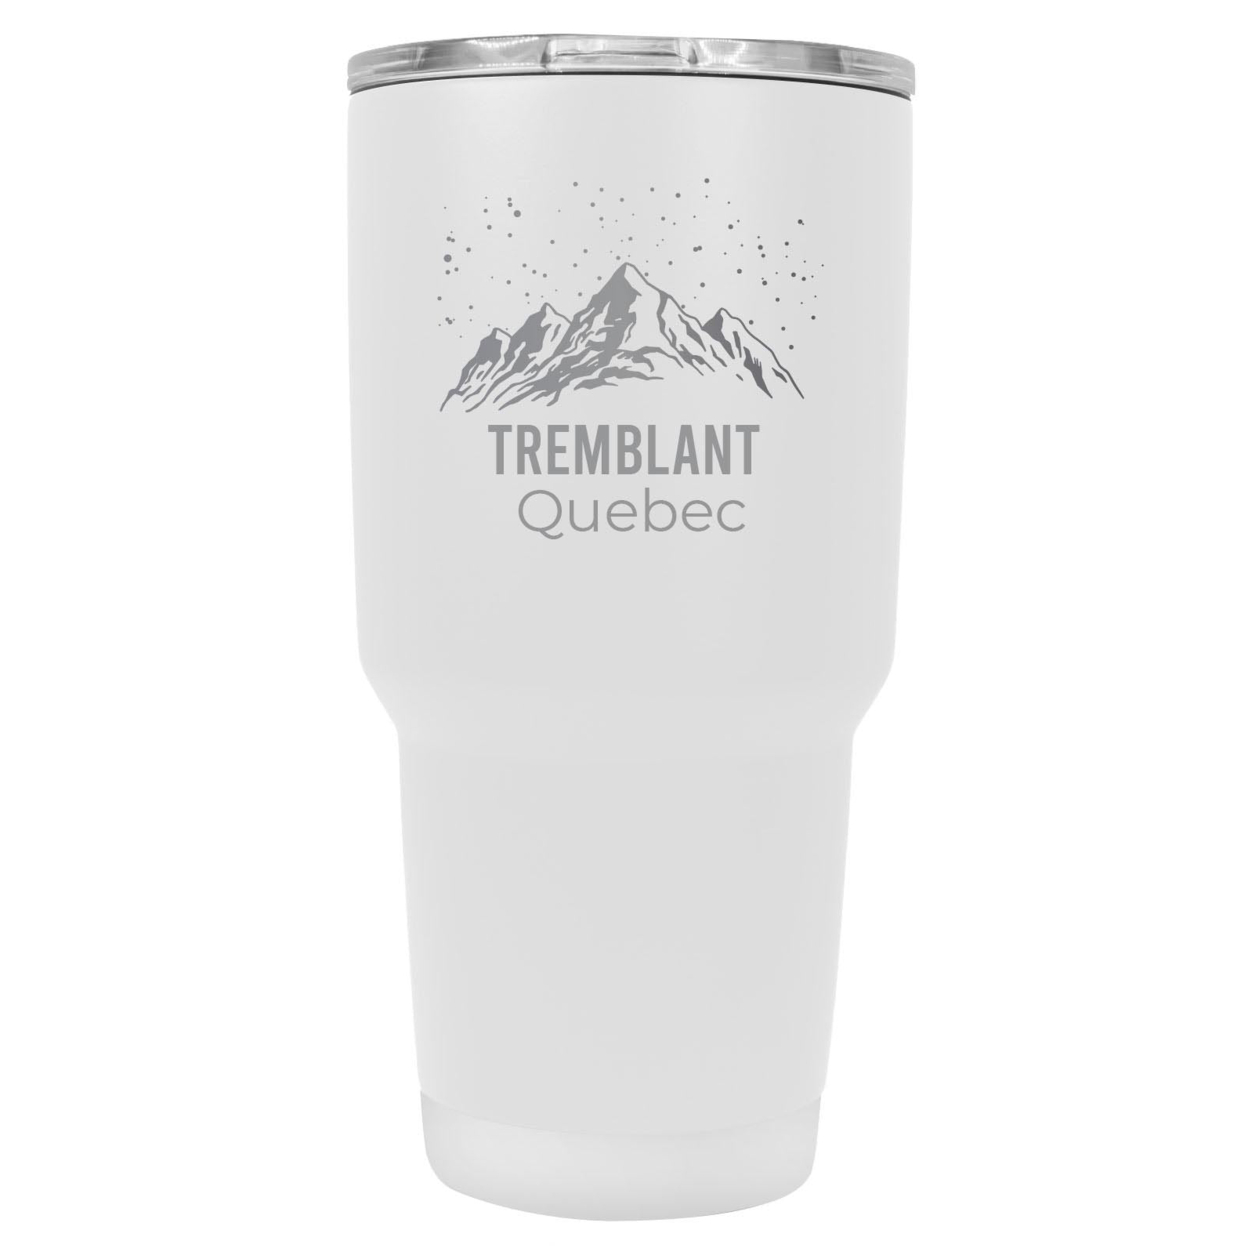 Tremblant Quebec Ski Snowboard Winter Souvenir Laser Engraved 24 Oz Insulated Stainless Steel Tumbler - Red